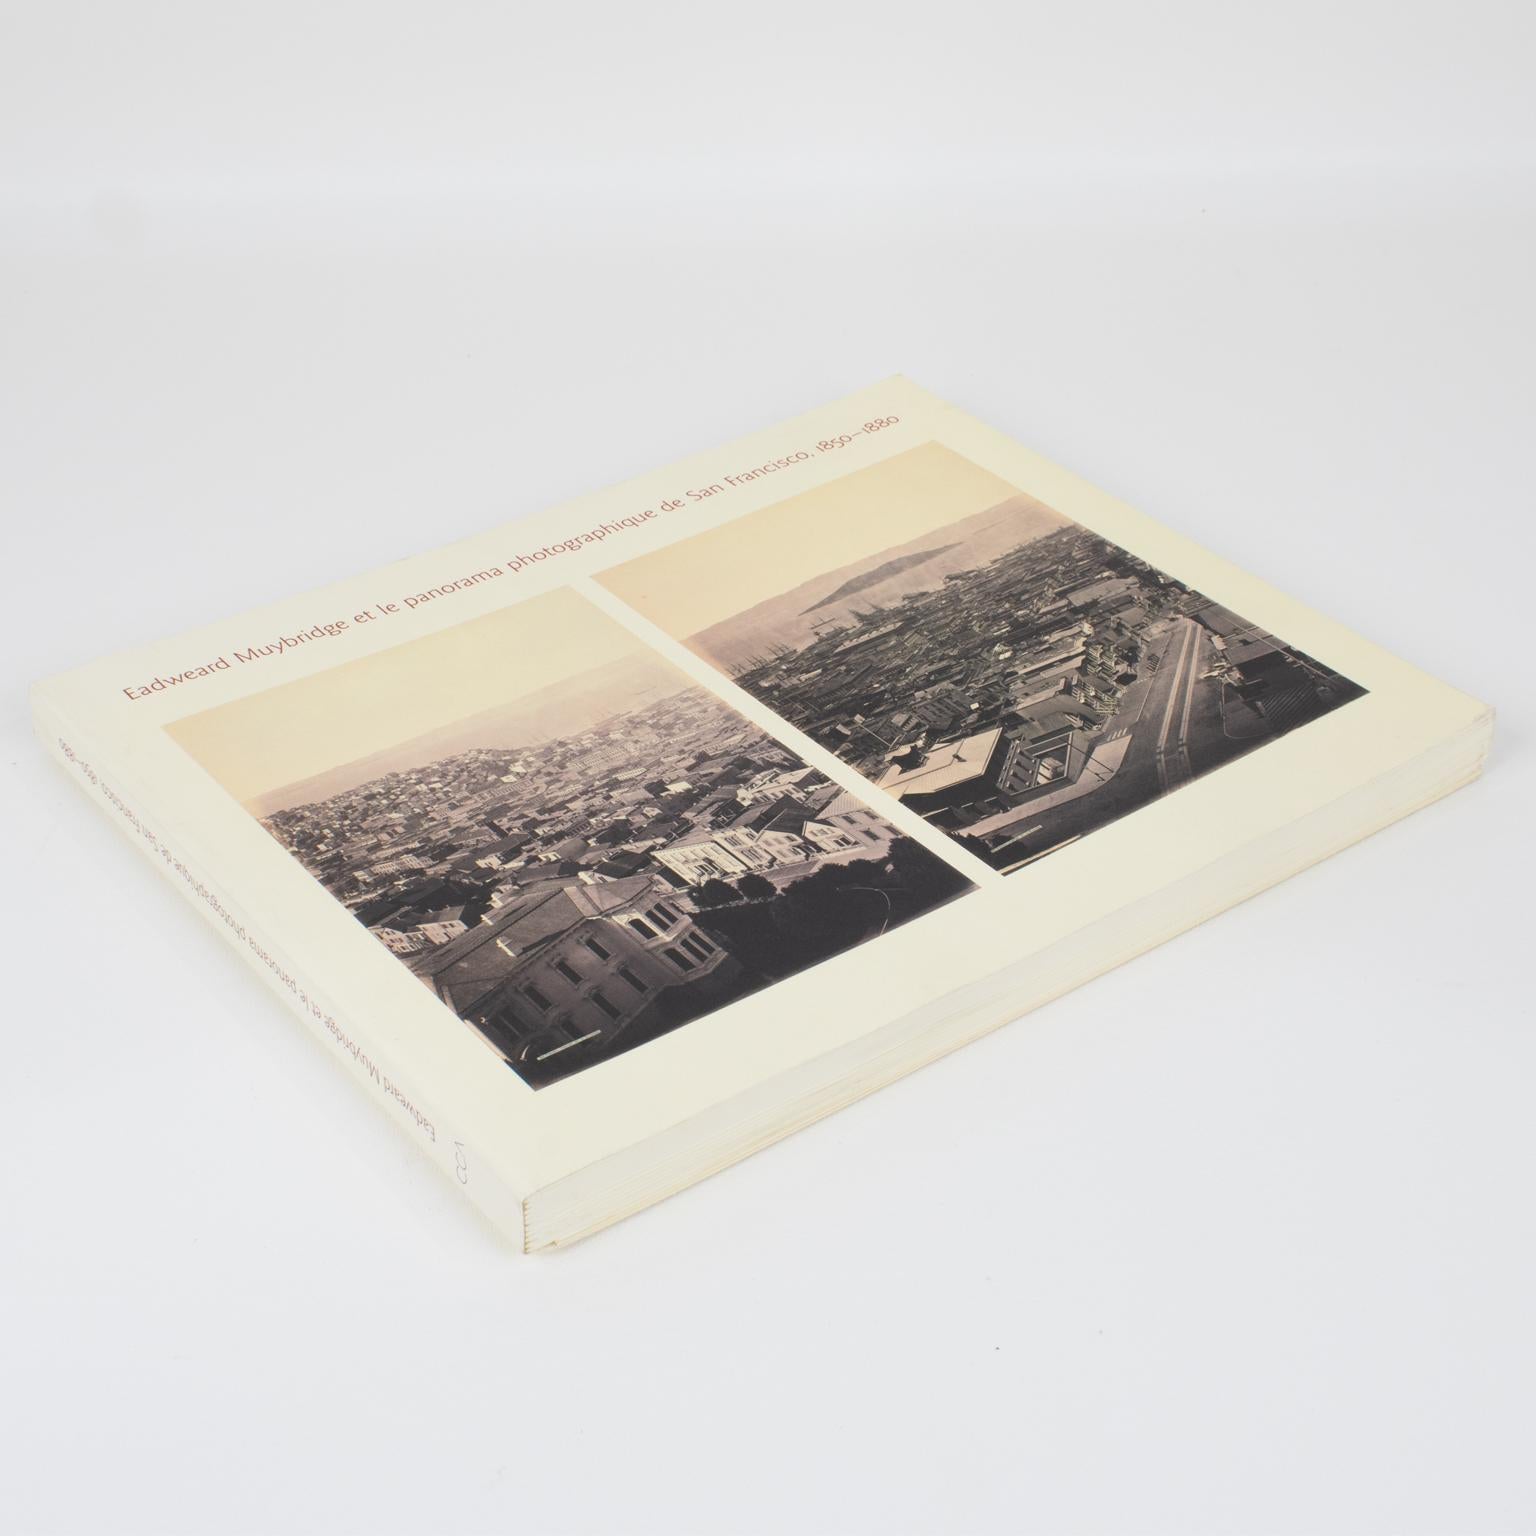 Modern Eadweard Muybridge and the Photographic Panorama of San Francisco, French Book For Sale